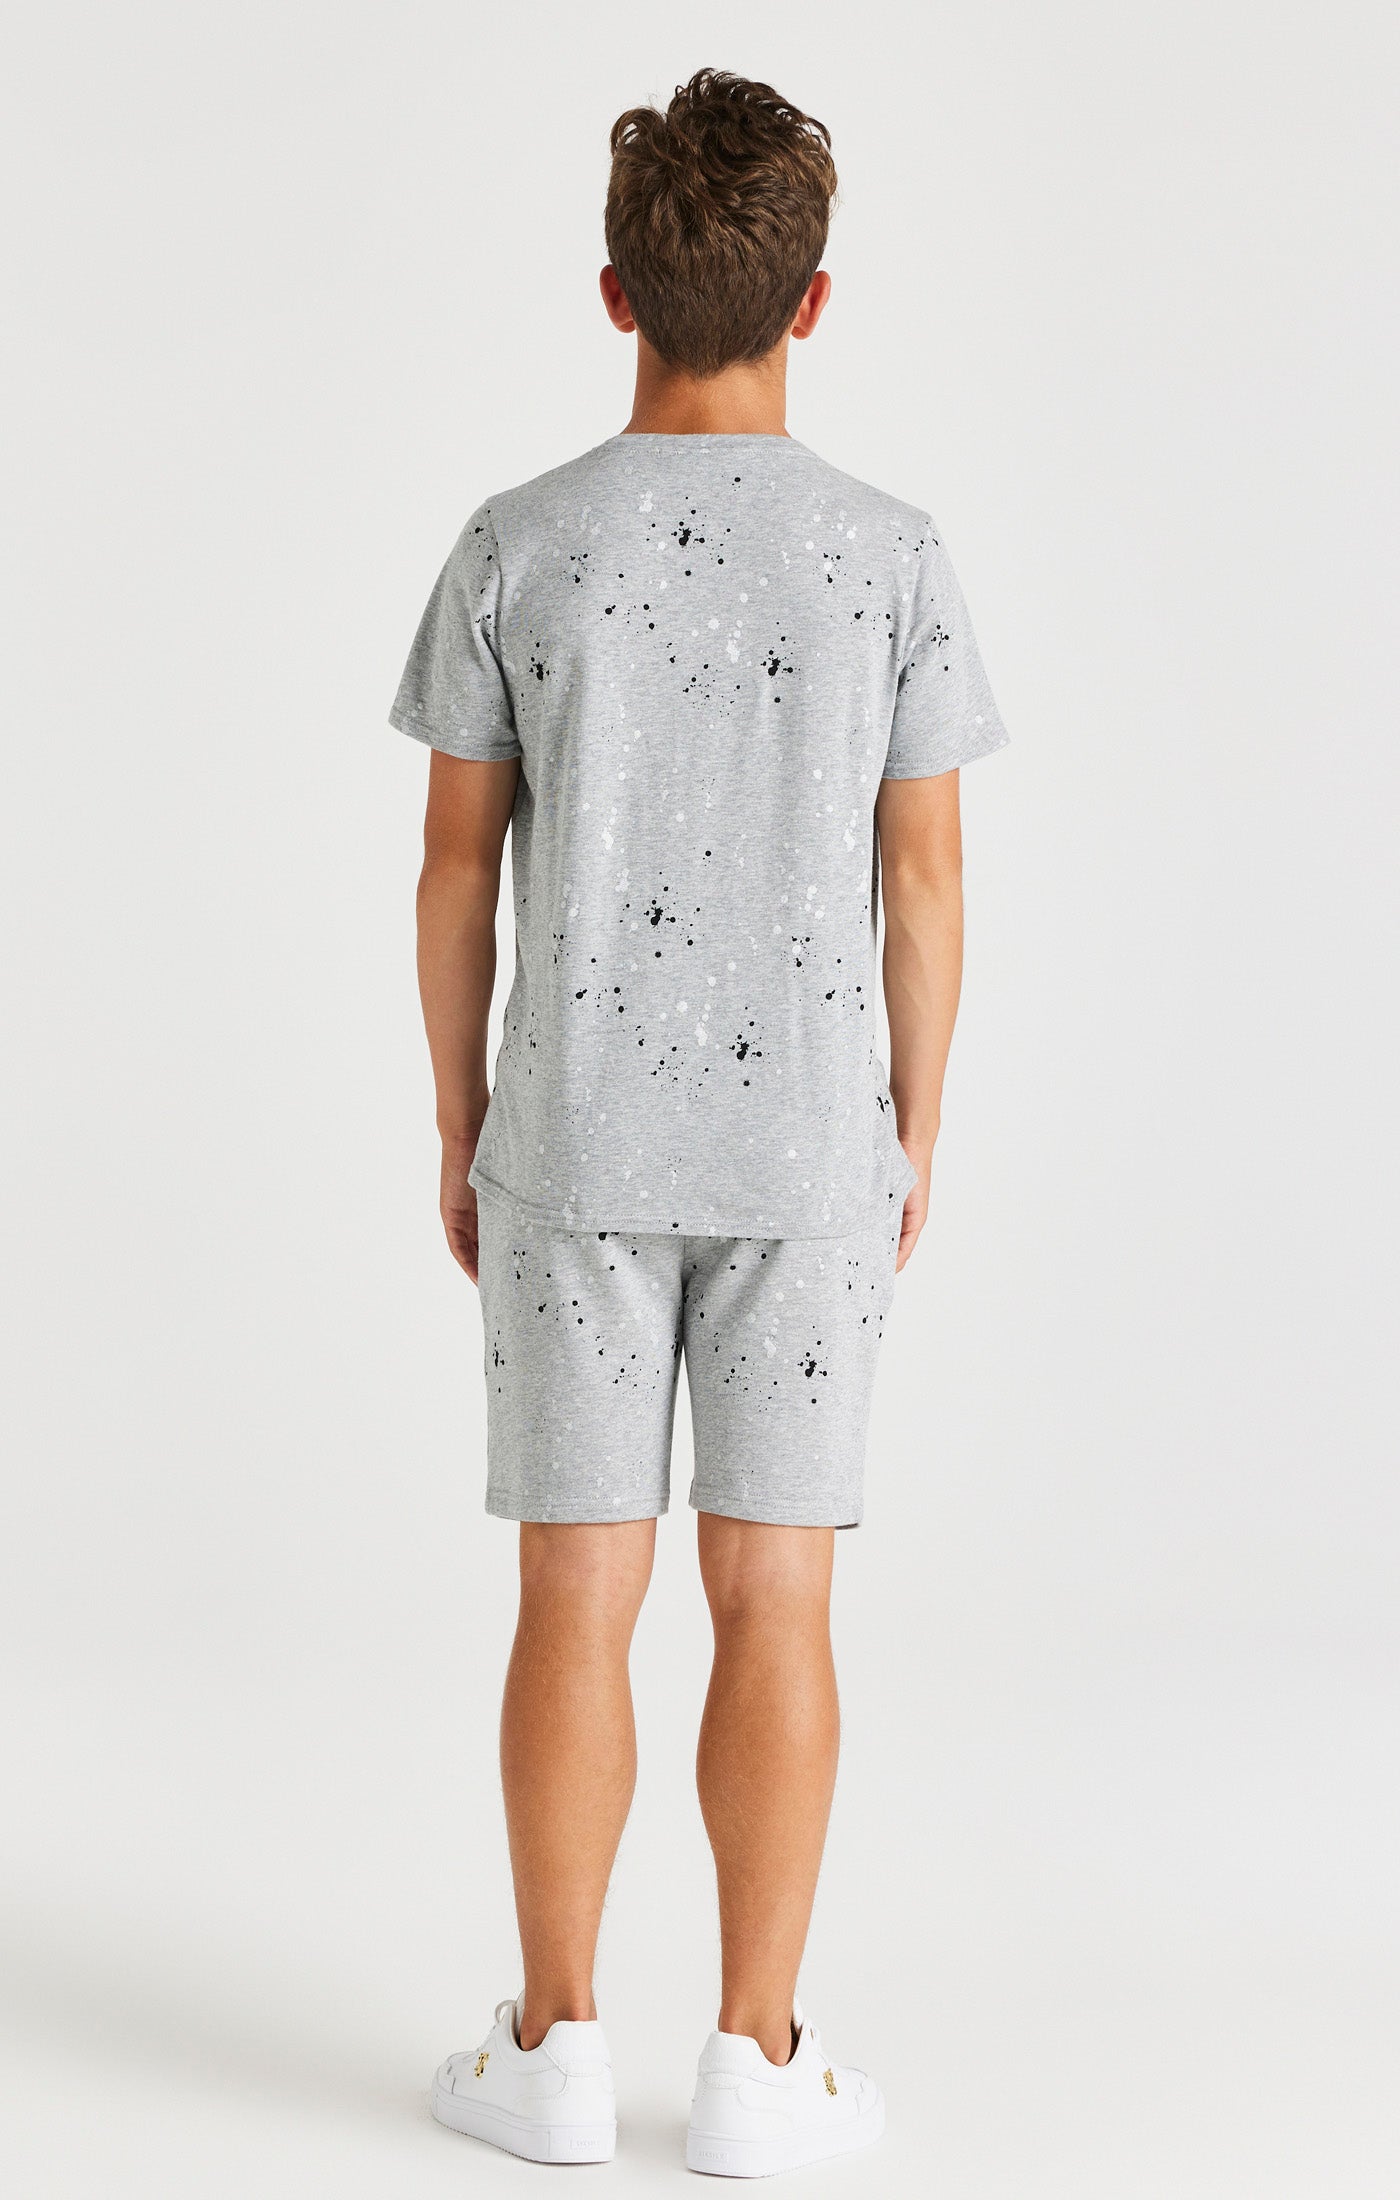 Load image into Gallery viewer, SikSilk Paint Splatter Shorts - Grey Marl (5)